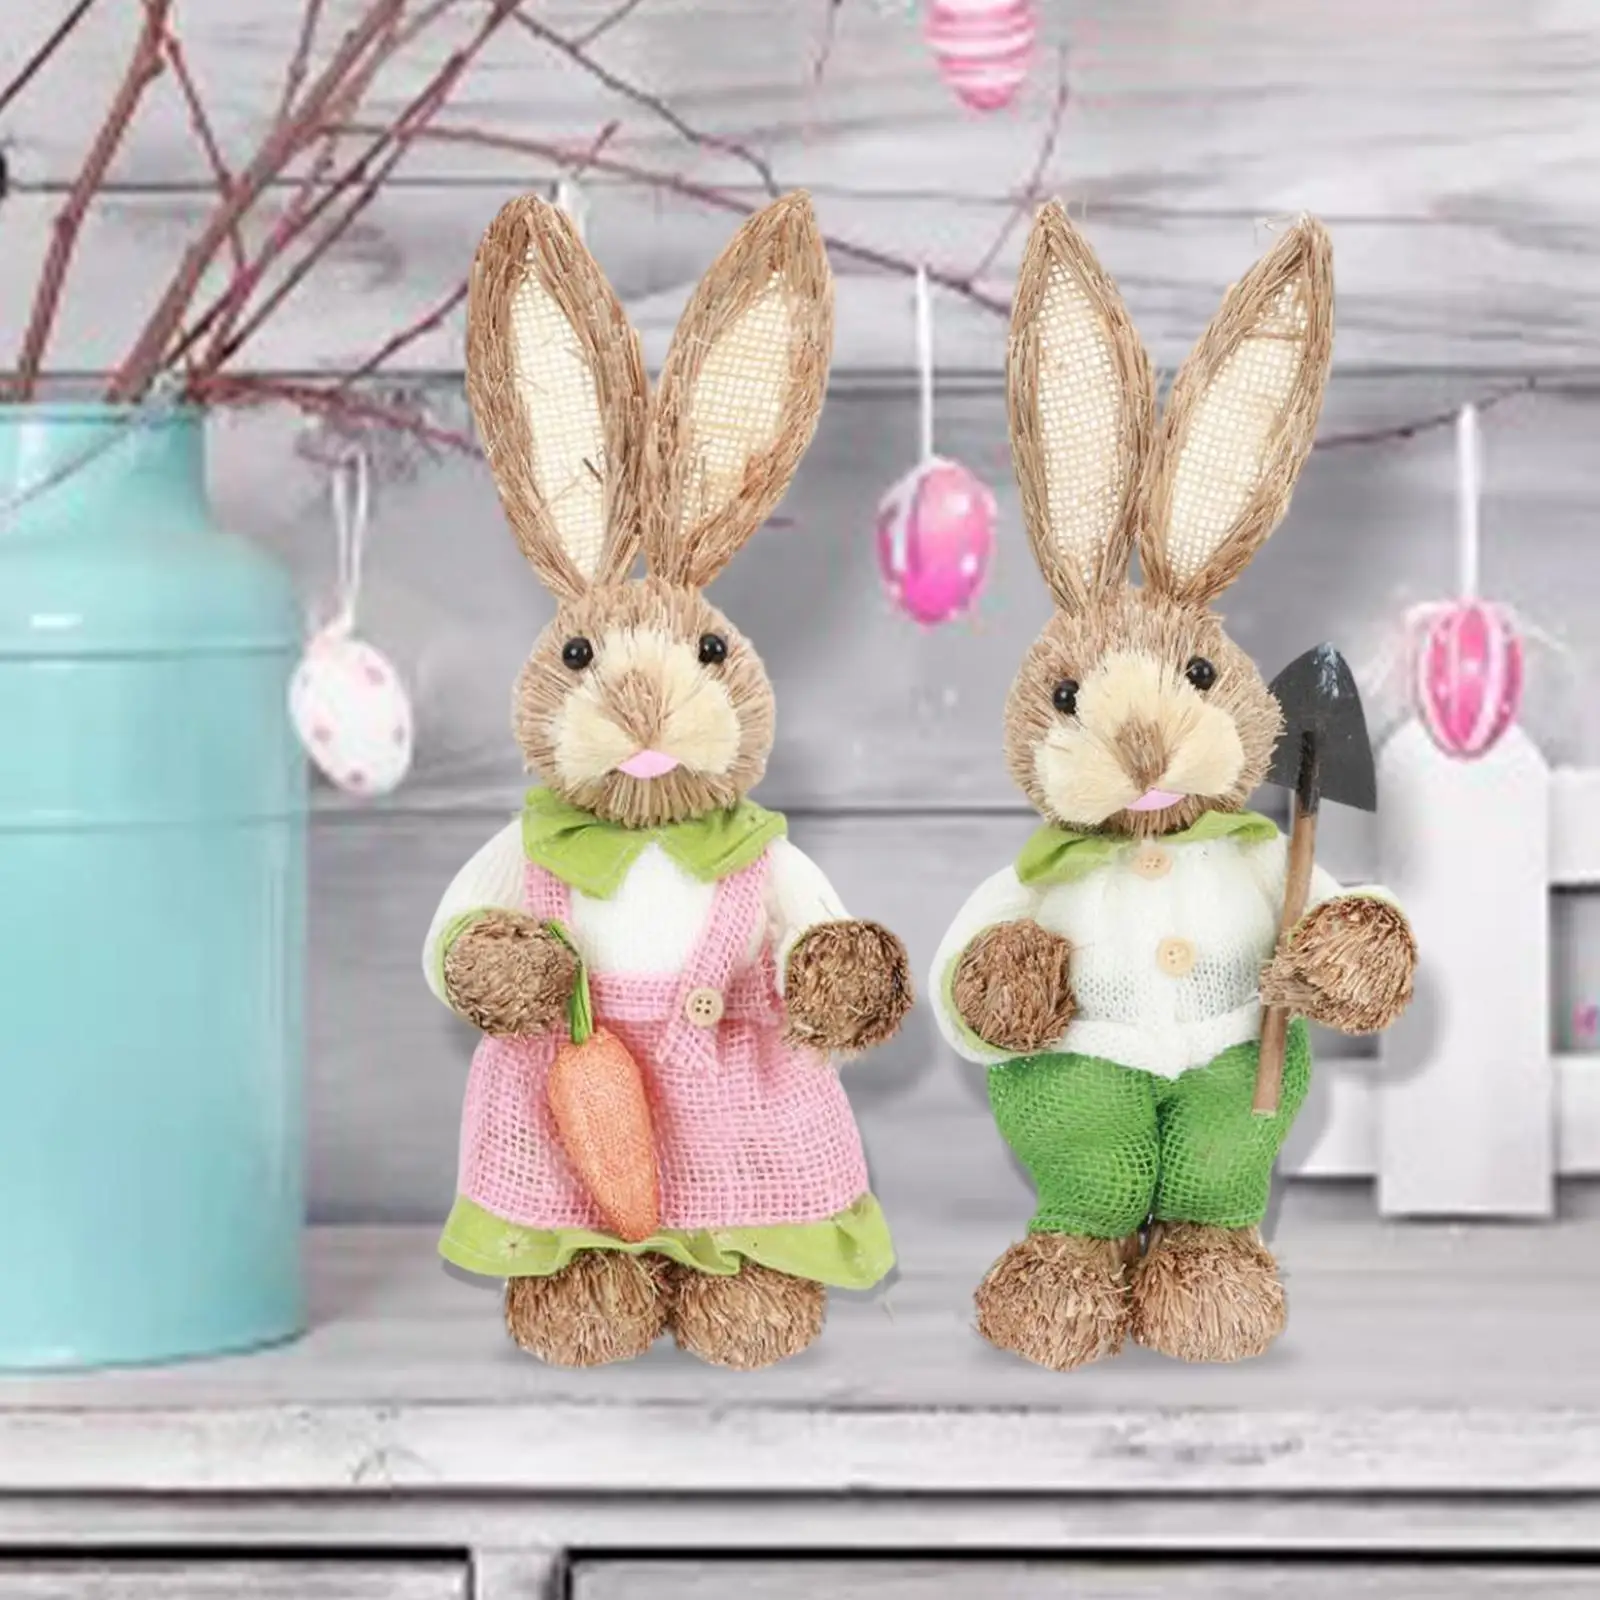 https://ae01.alicdn.com/kf/S47814d1c1f49435b85af6e9e7e25be662/2x-Straw-Bunny-Easter-Doll-Rabbit-Decoration-Photo-Props-Bunny-Statues-Ornament.jpg